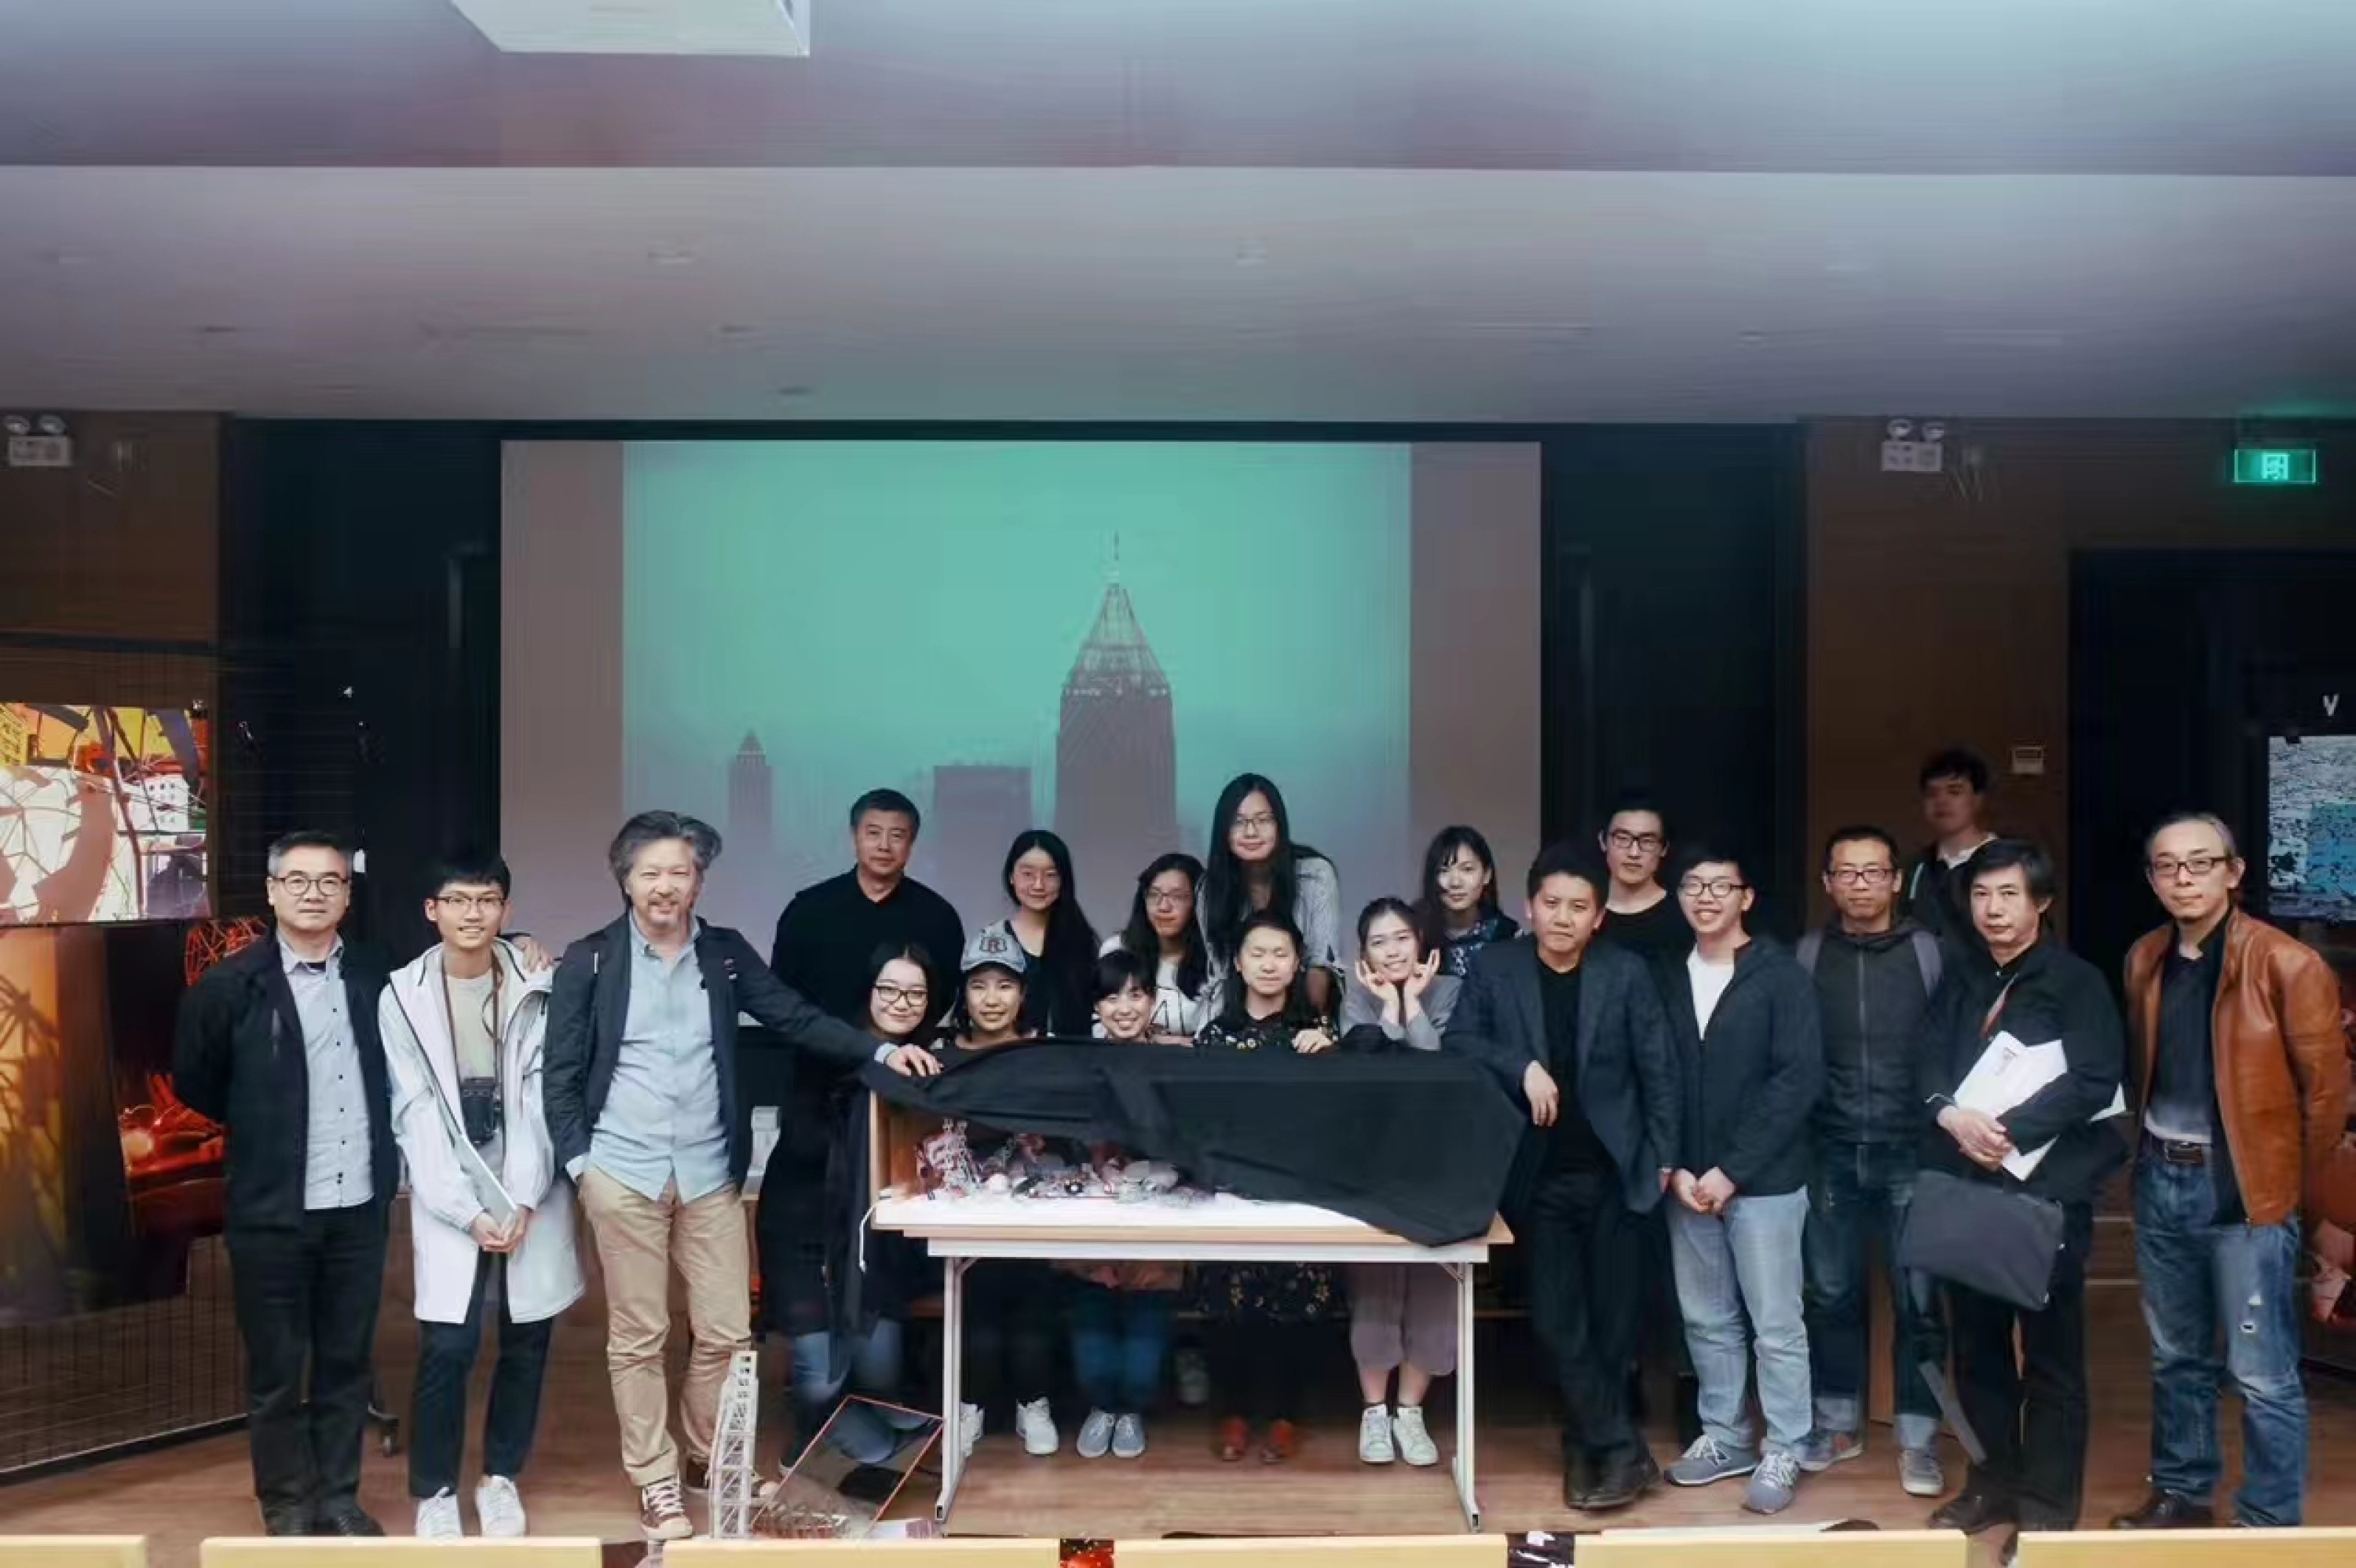 Xiaodu Liu and Zigeng Wang Jointly Guided the Third Year Open Course “Impact and Resistance: Strategies and Experiments for Urban Renewal in Old Nantou," at the School of Architecture of Tsinghua University